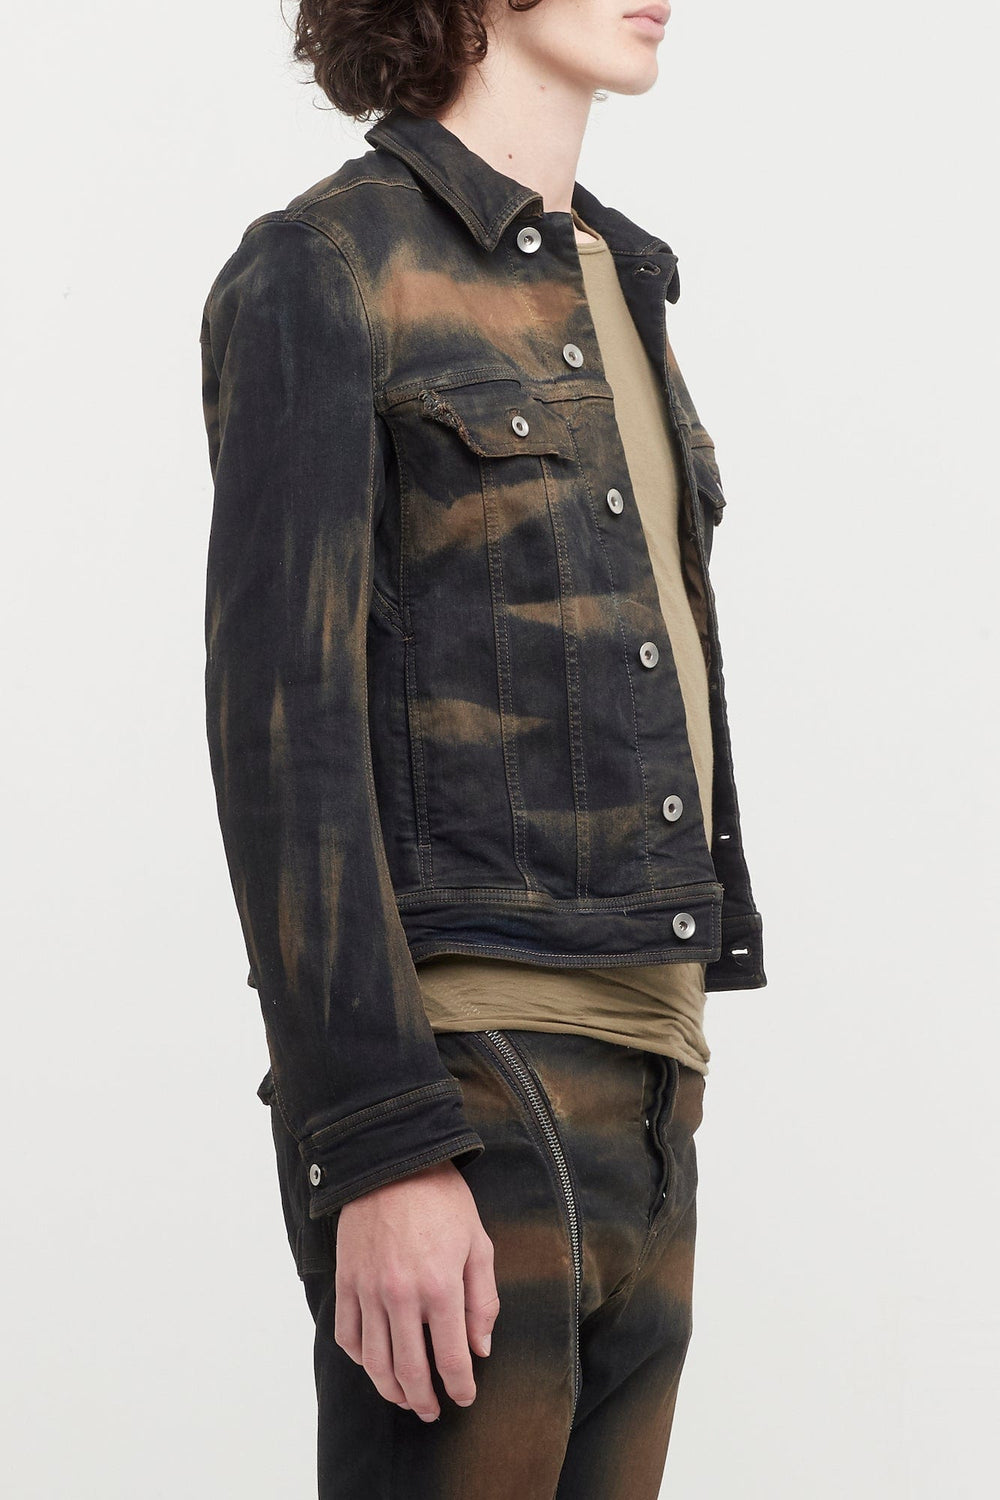 Rick Owens DRKSHDW Washed Denim Jacket with Leather Sleeves